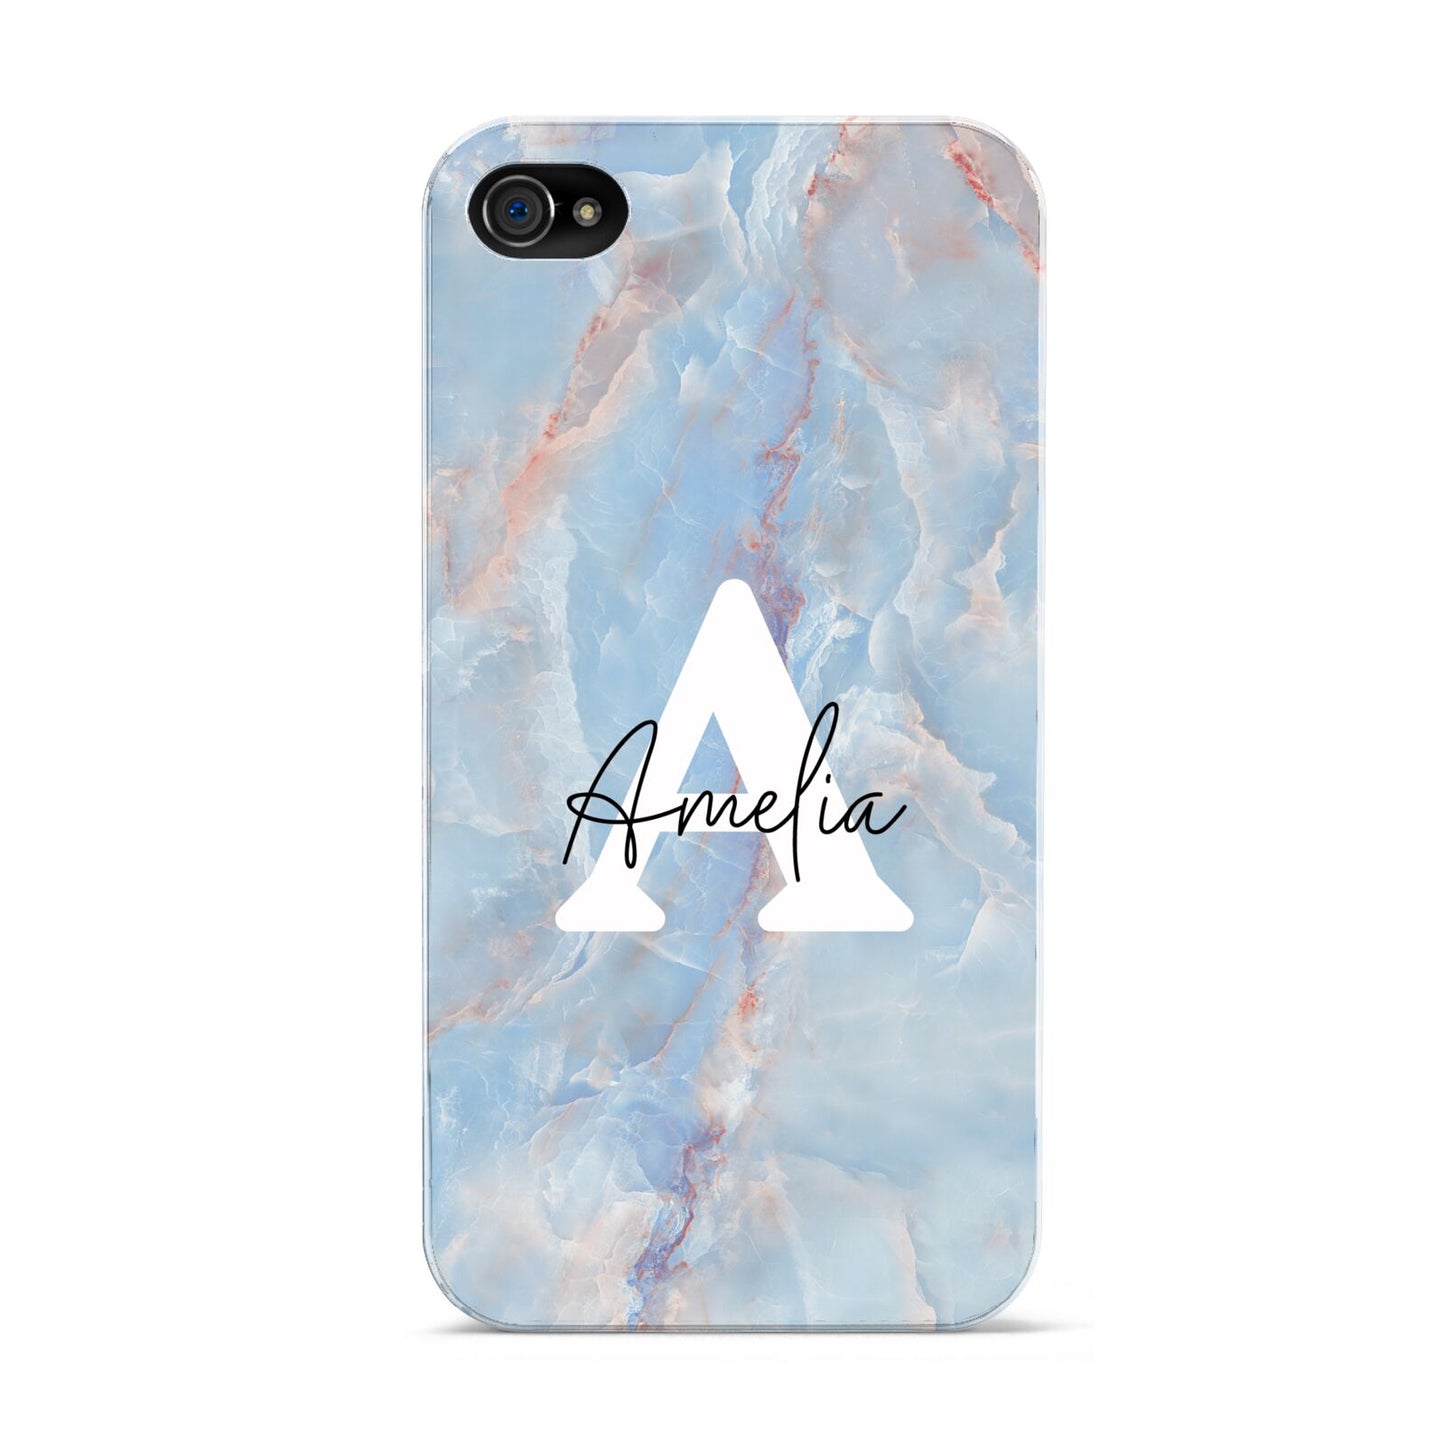 Blue Onyx Marble Apple iPhone 4s Case